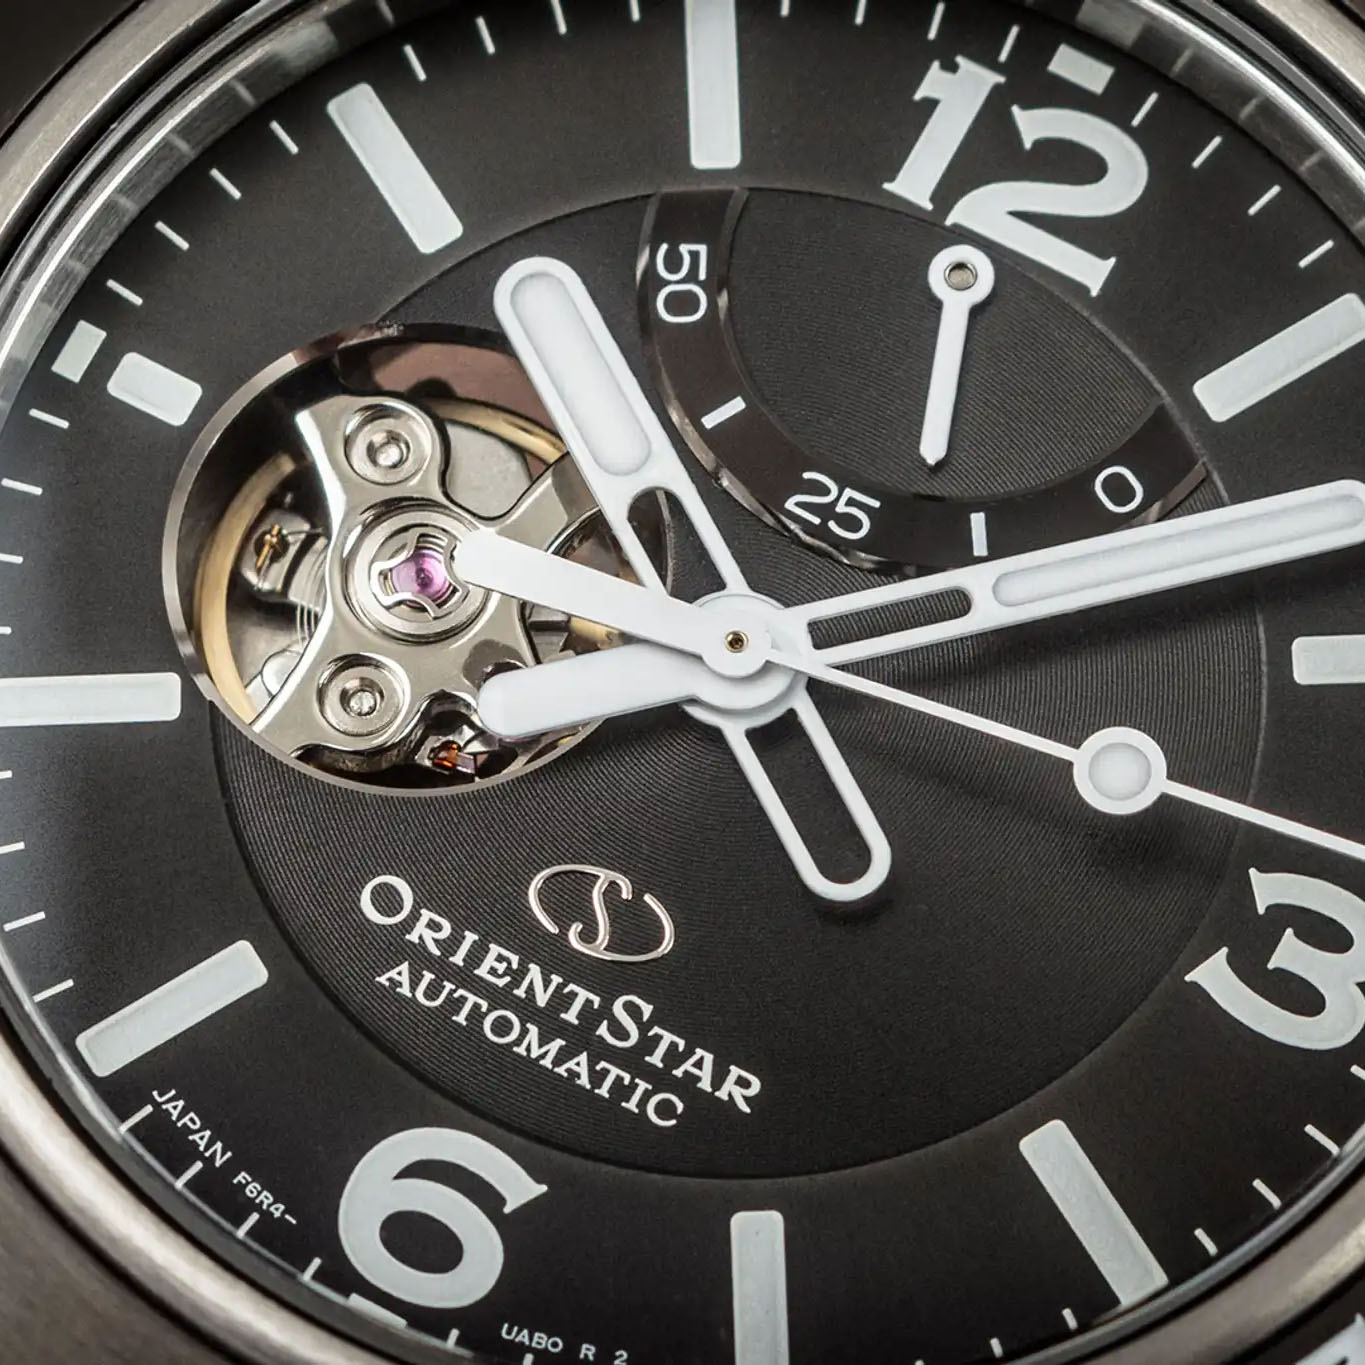  Orient Star RE-AT0101B  .